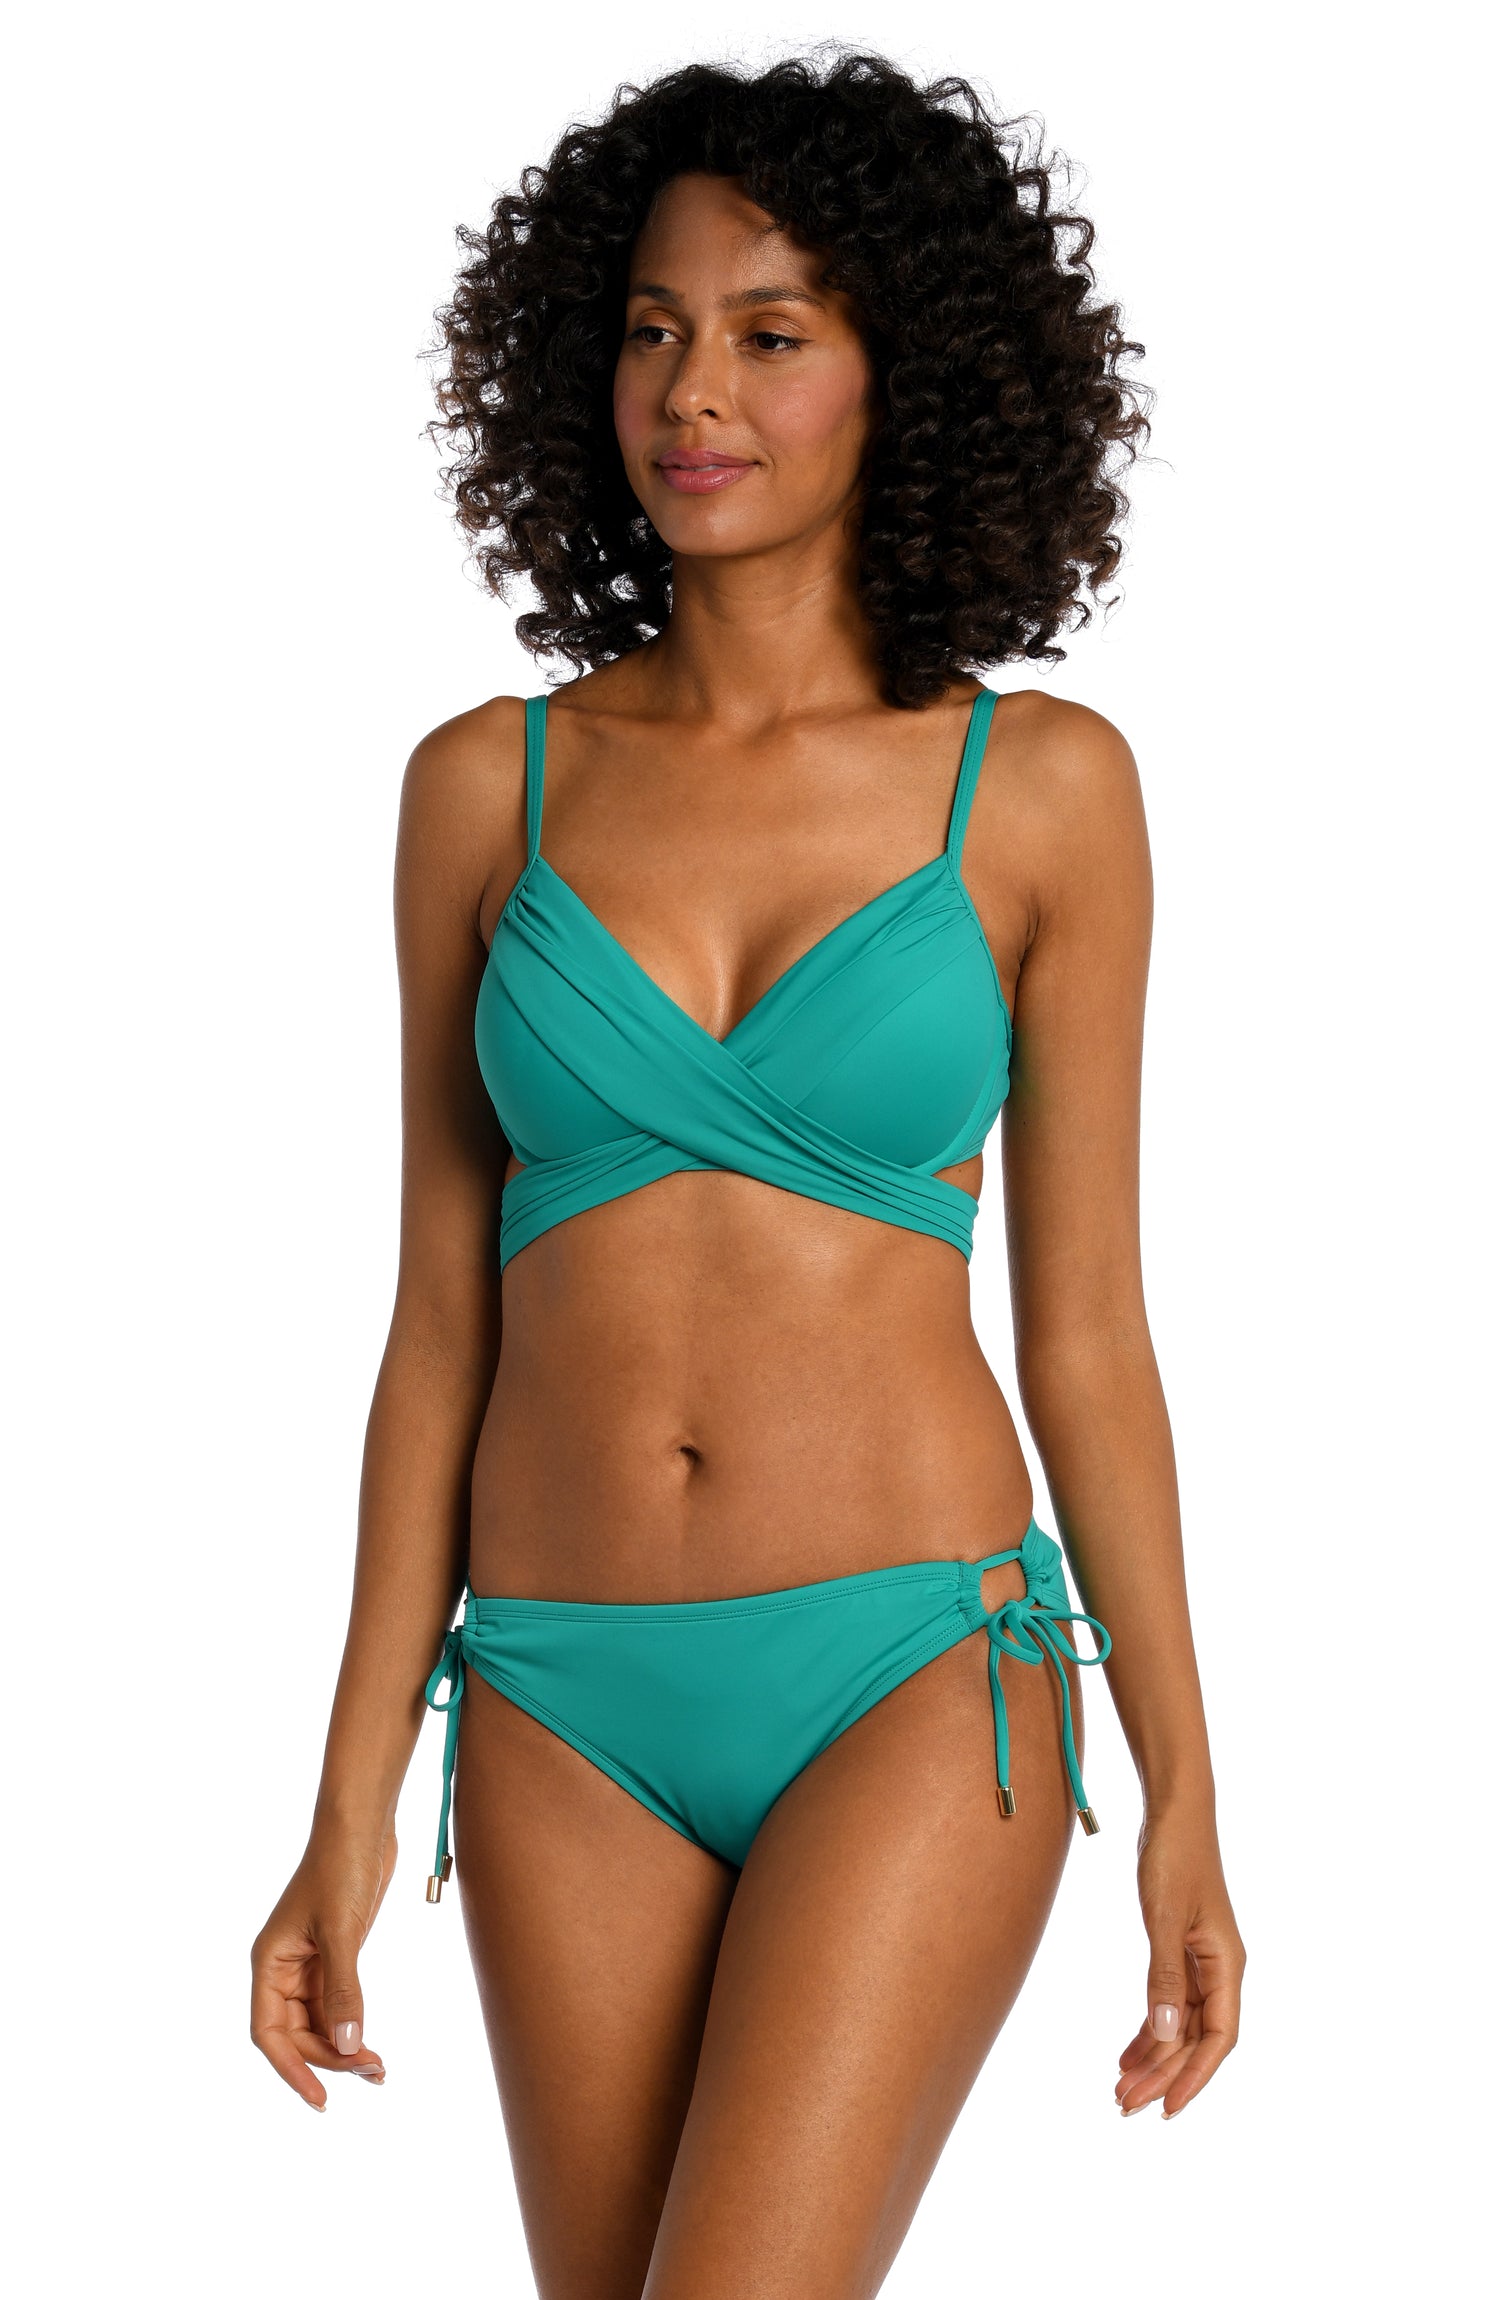 Model is wearing a emerald colored underwire swimsuit top from our Best-Selling Island Goddess collection.